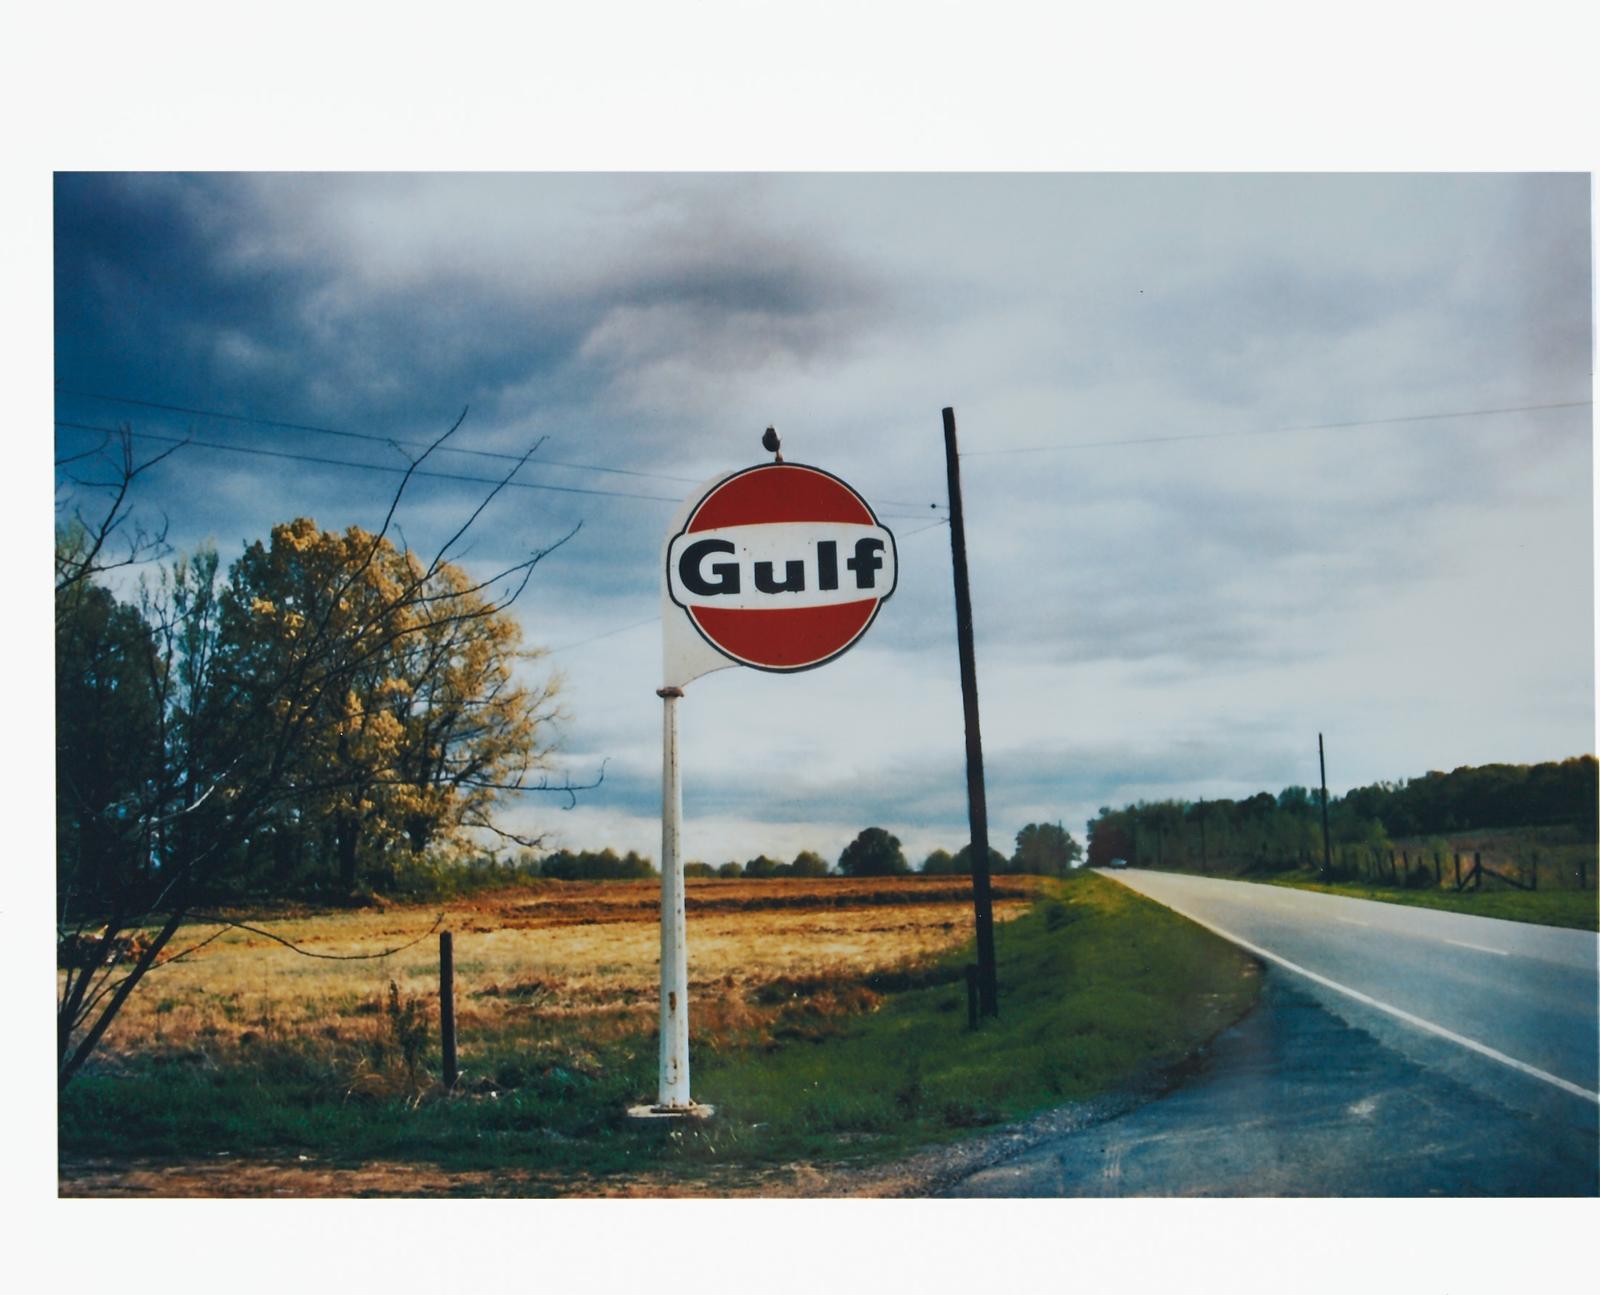 William Eggleston (1939) - Tennessee (Gulf Sign), From 